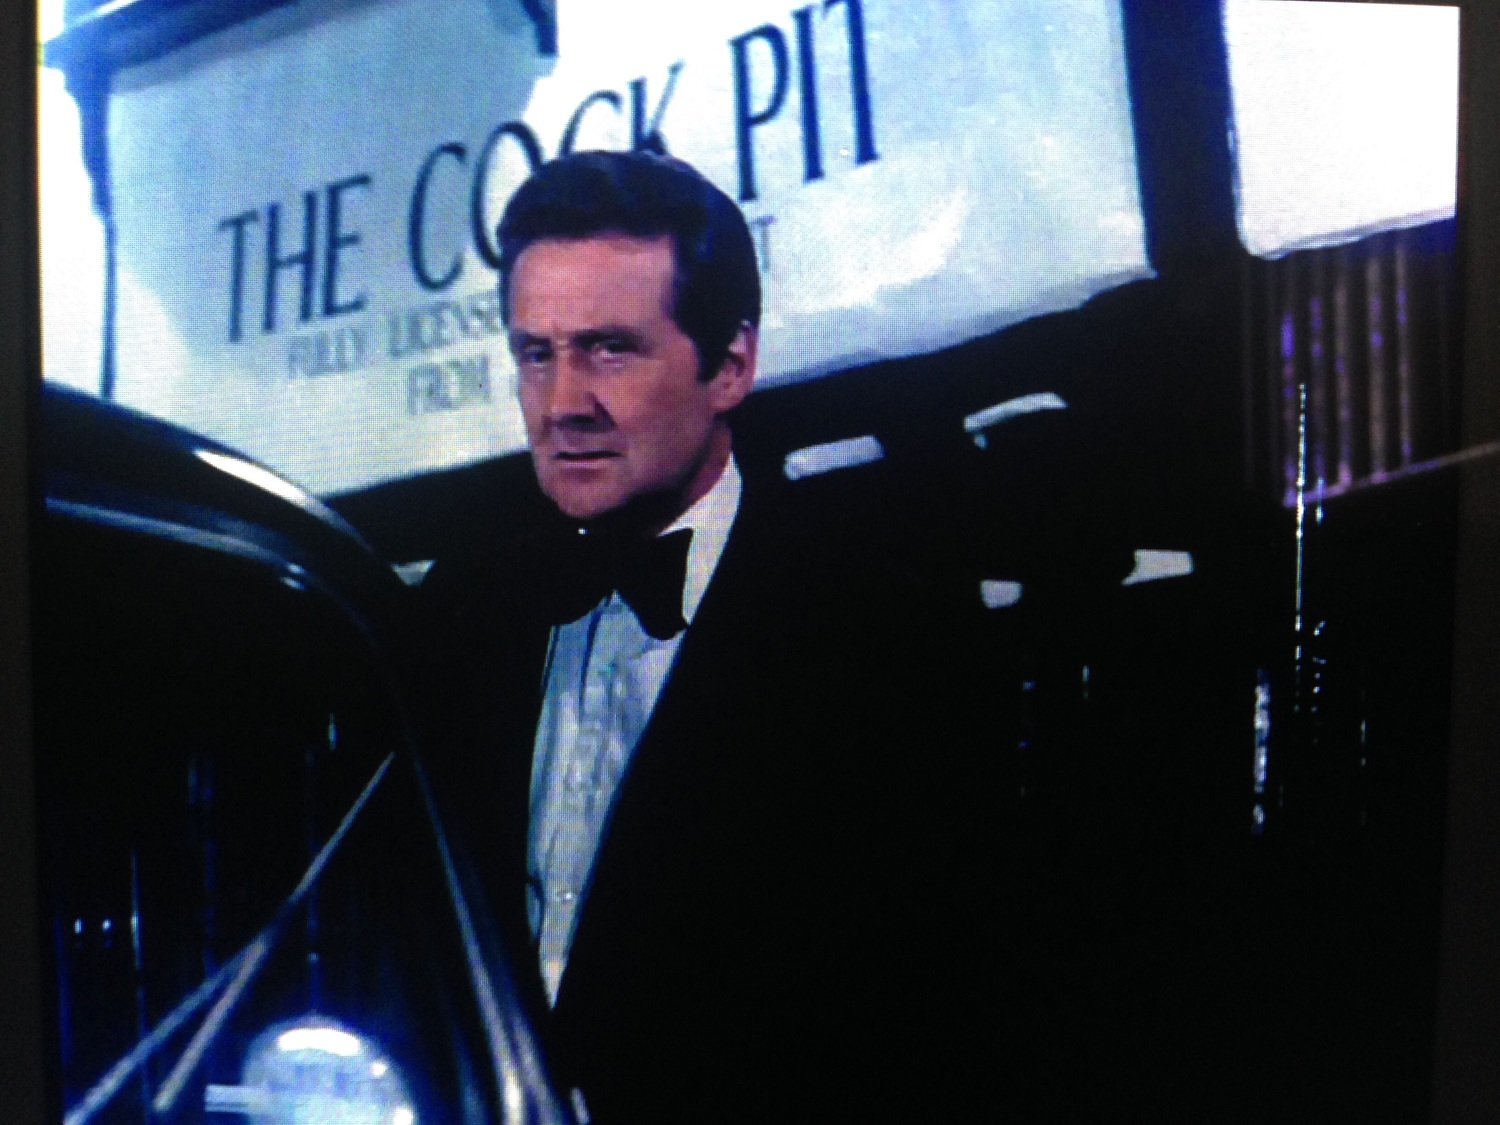 Patrick Macnee as Steed leaving a nightclub called The Cock Pit